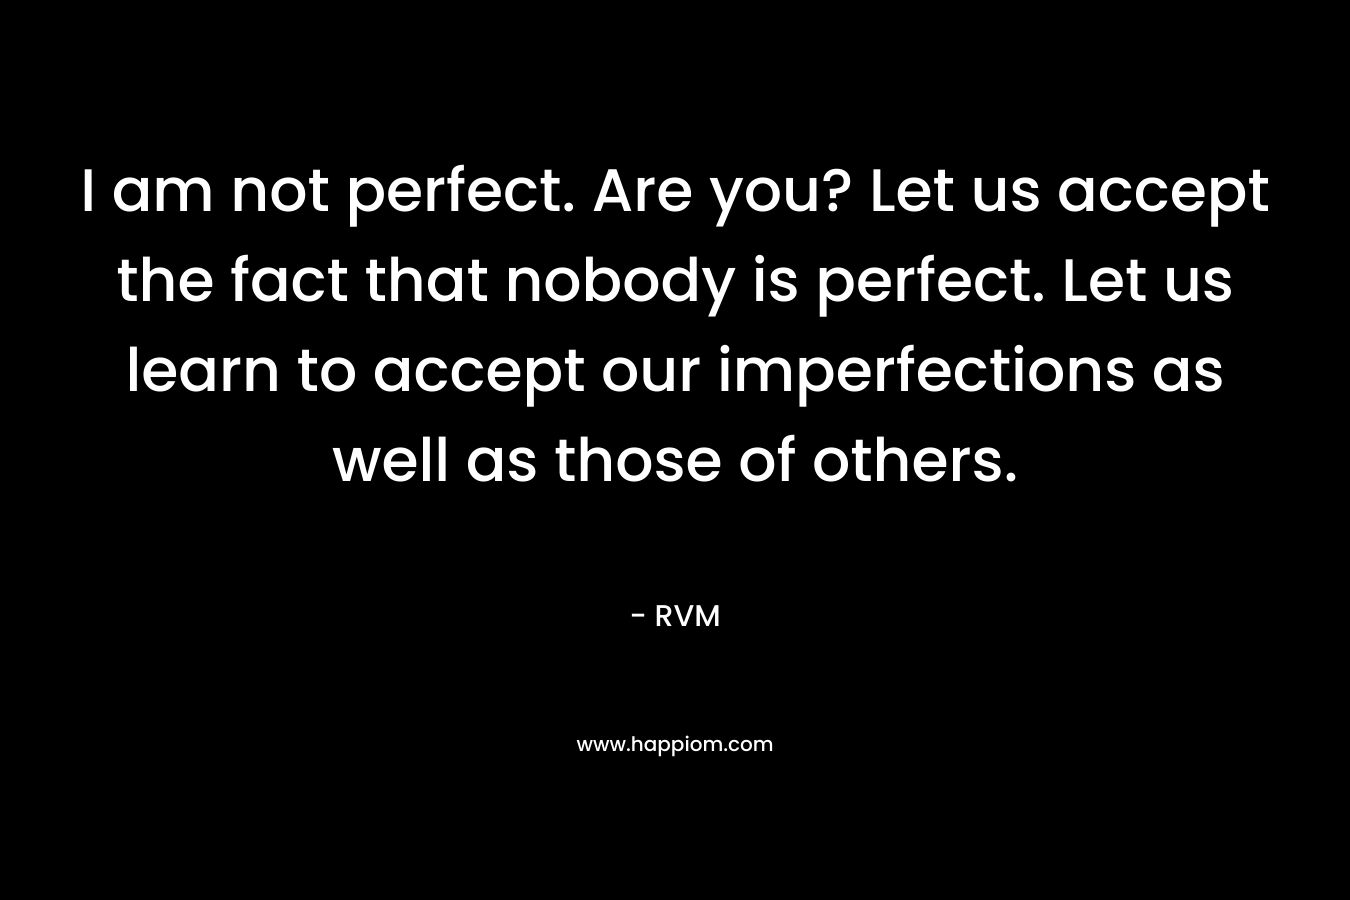 I am not perfect. Are you? Let us accept the fact that nobody is perfect. Let us learn to accept our imperfections as well as those of others.